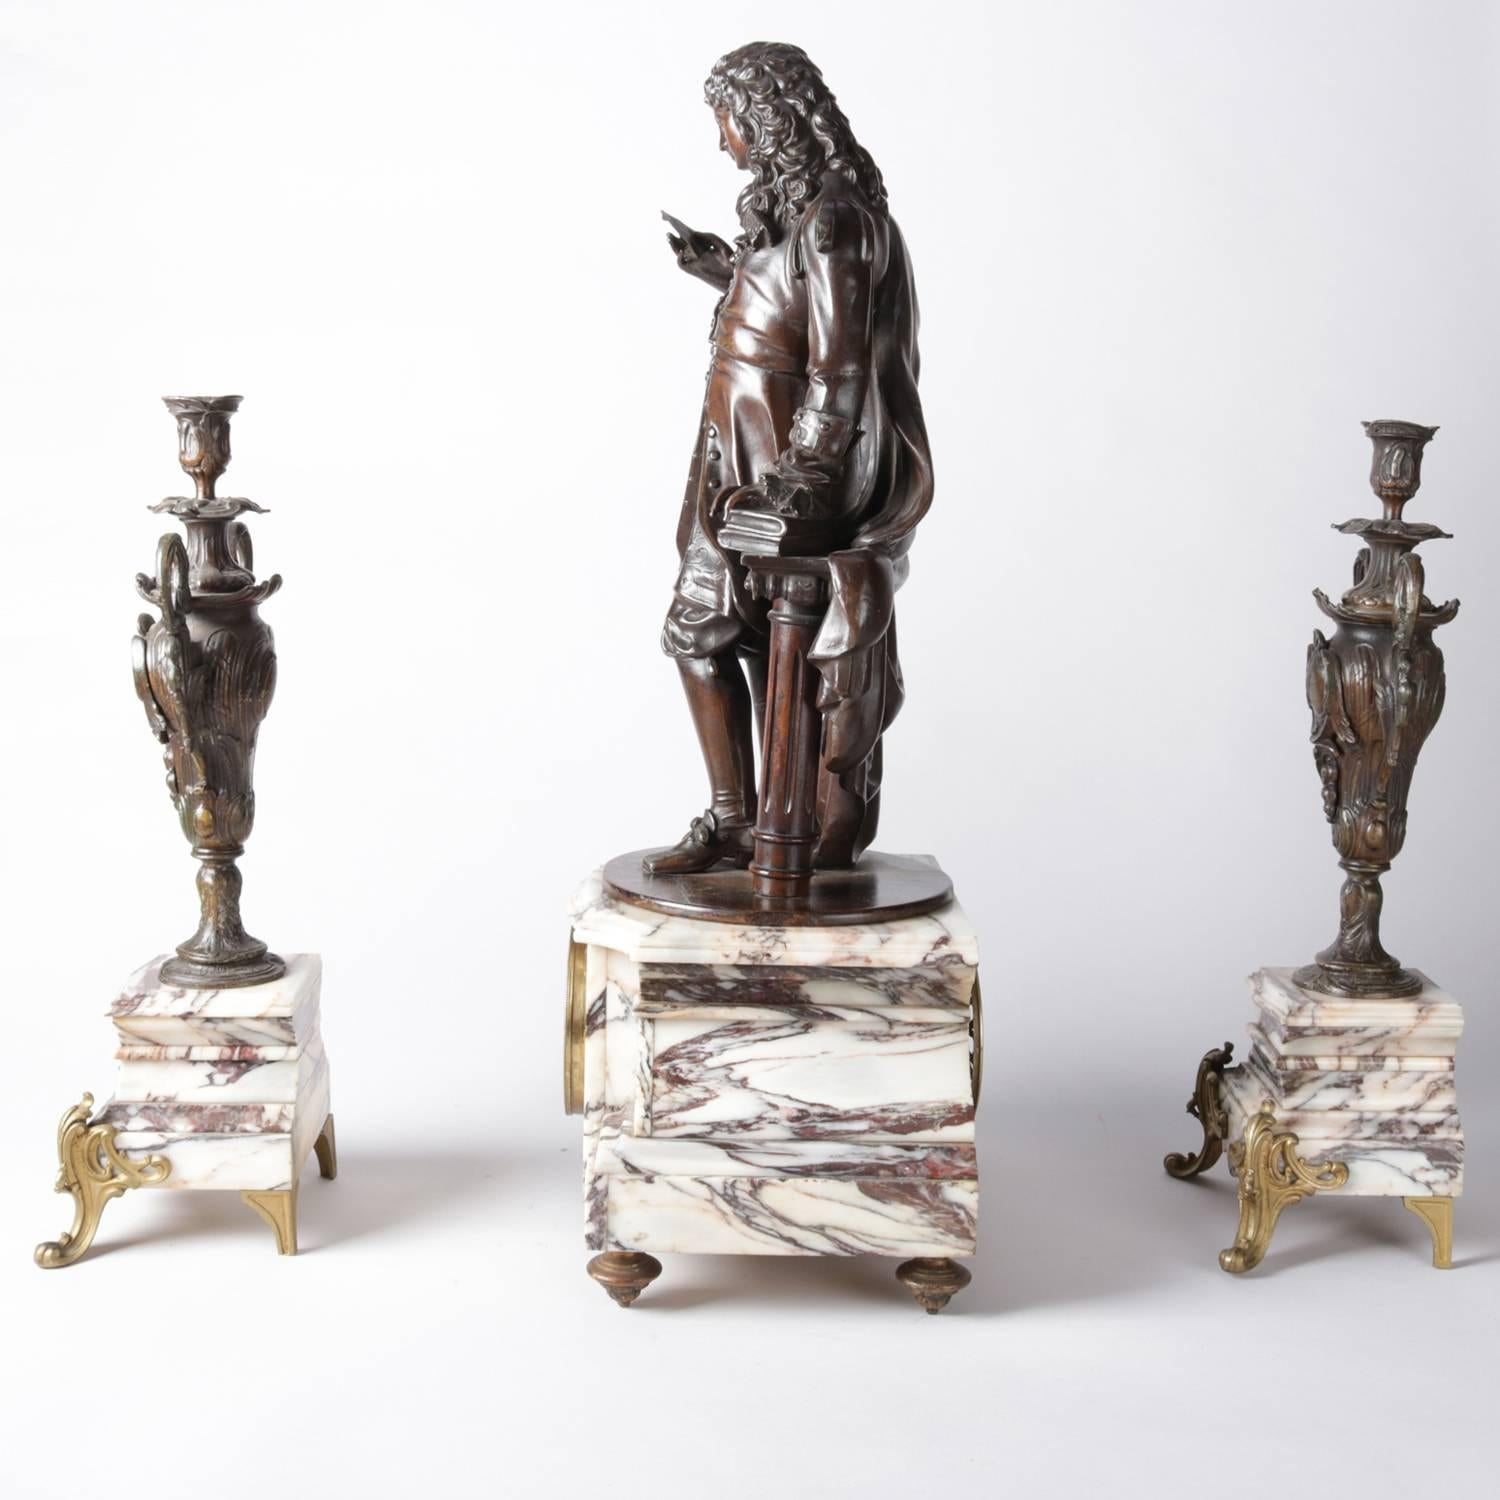 20th Century French Figural Bronzed and Marble Louis XIV Garniture Clock and Candles Set